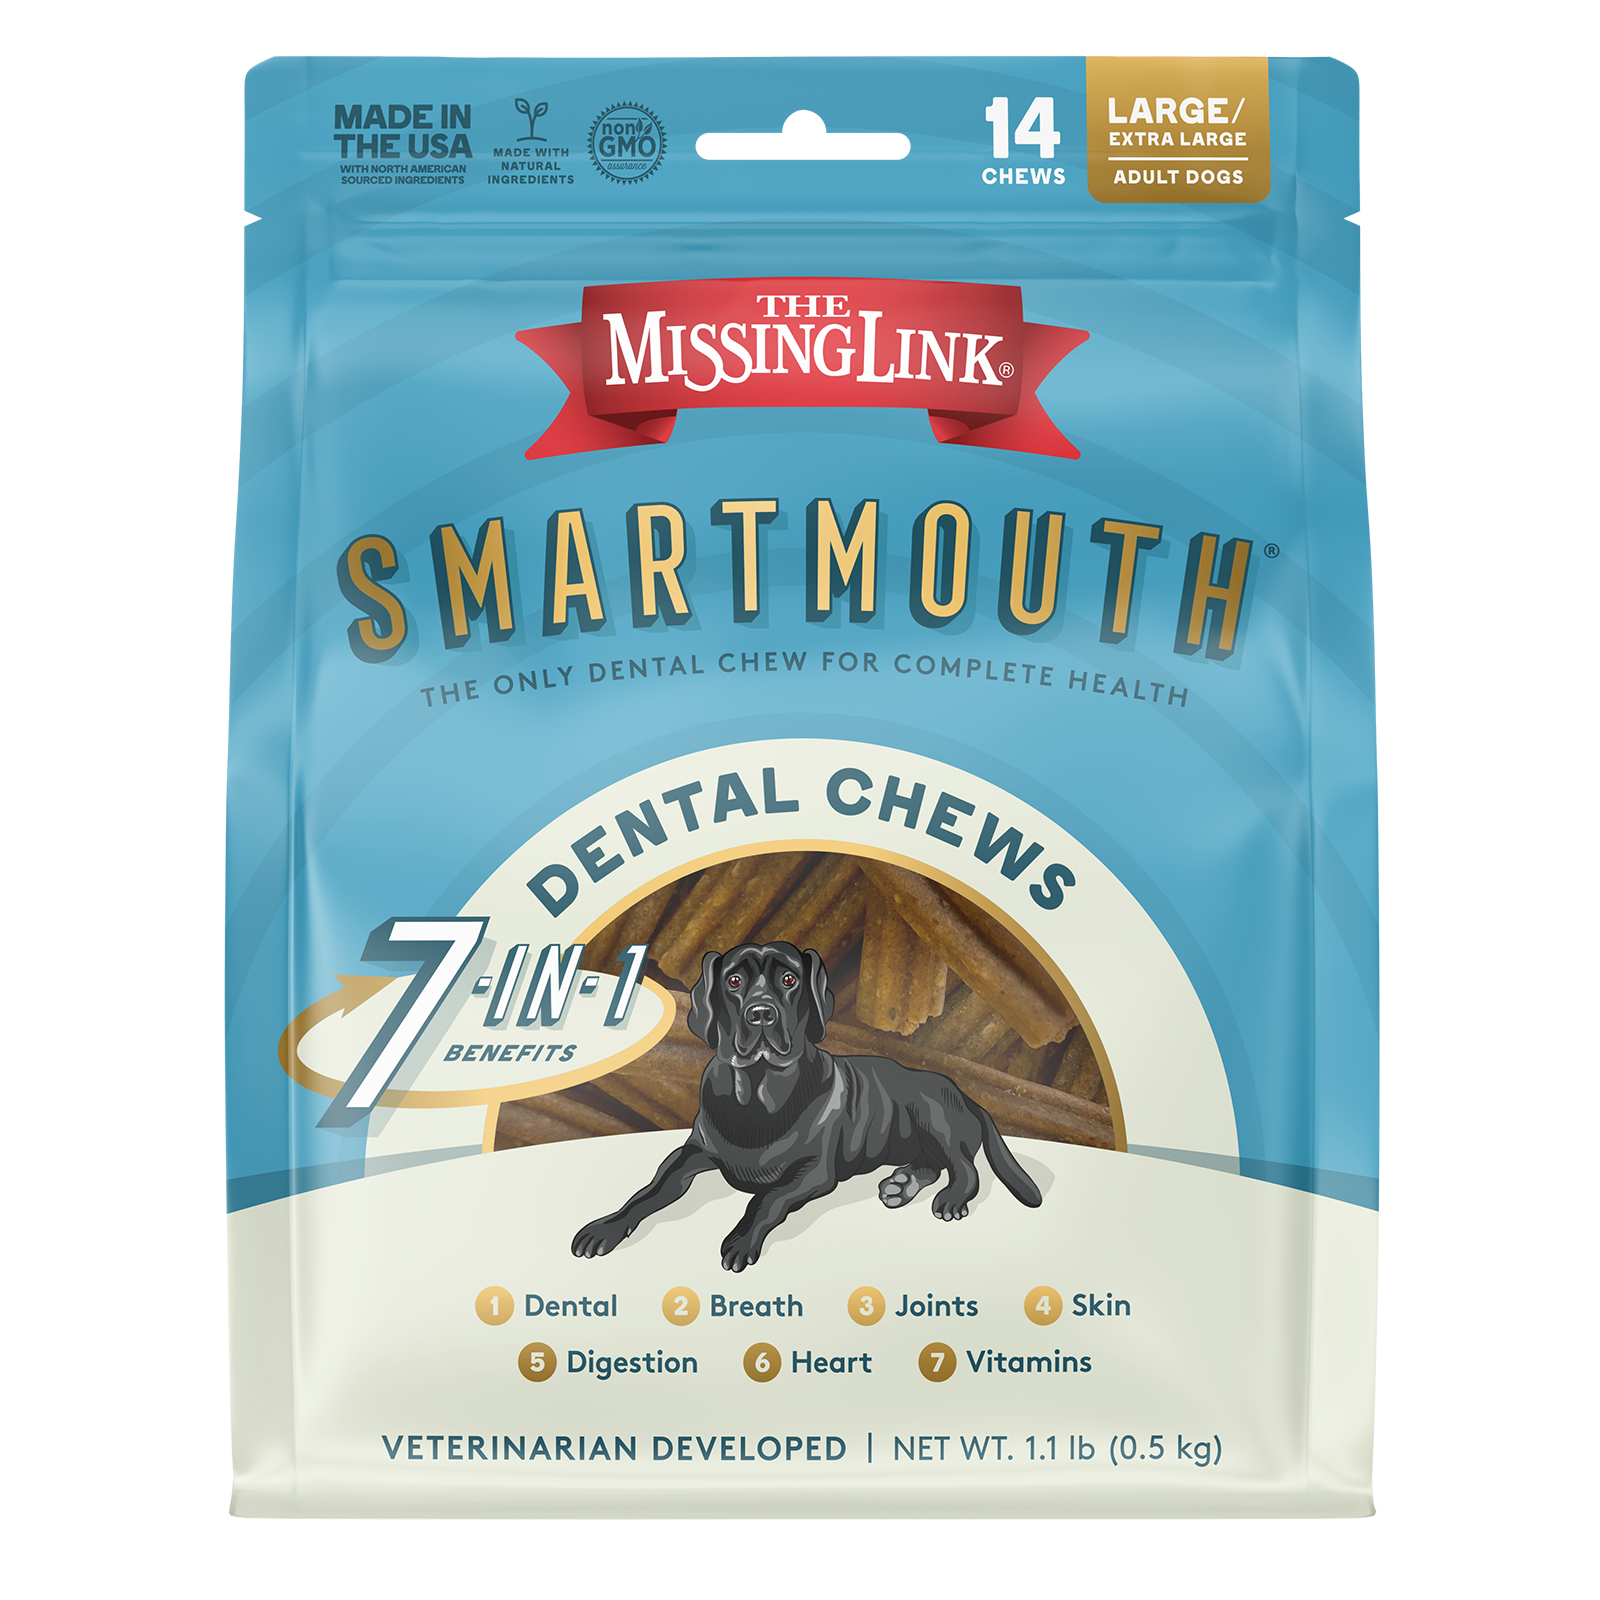 The Missing Link Smartmouth dental chews, the only dental chew for complete health.